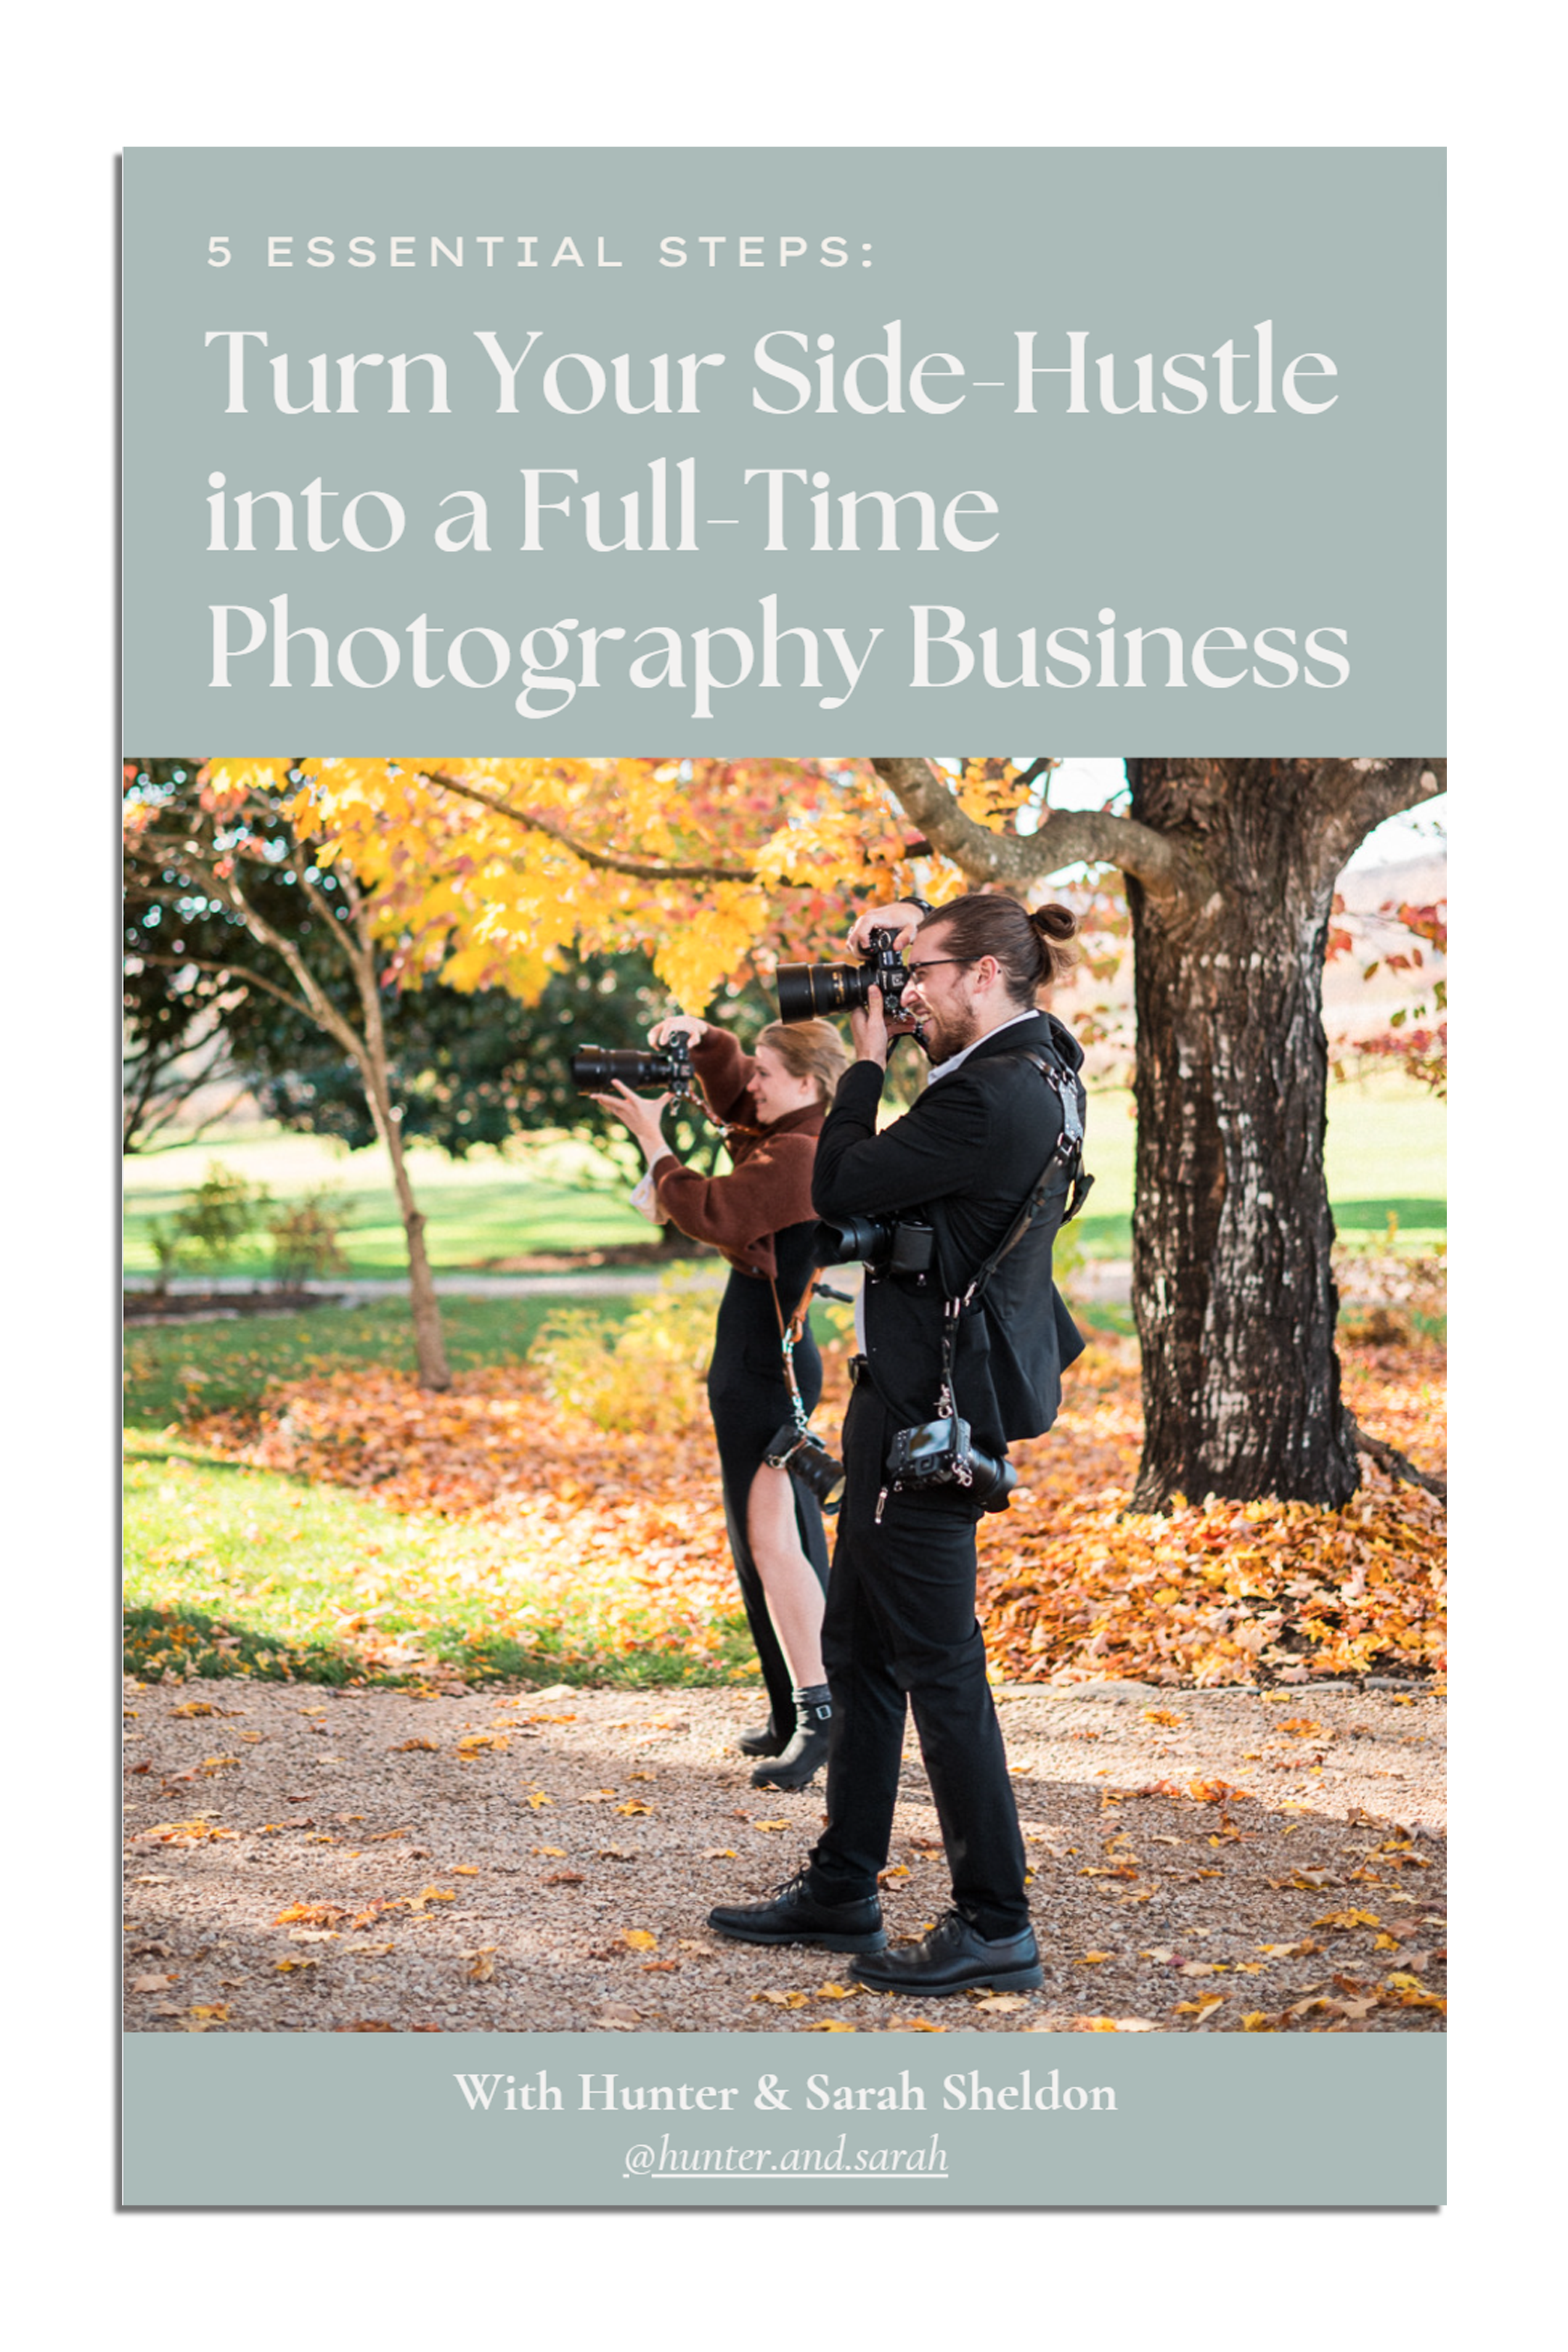 Your free guide to going full time in your photography business